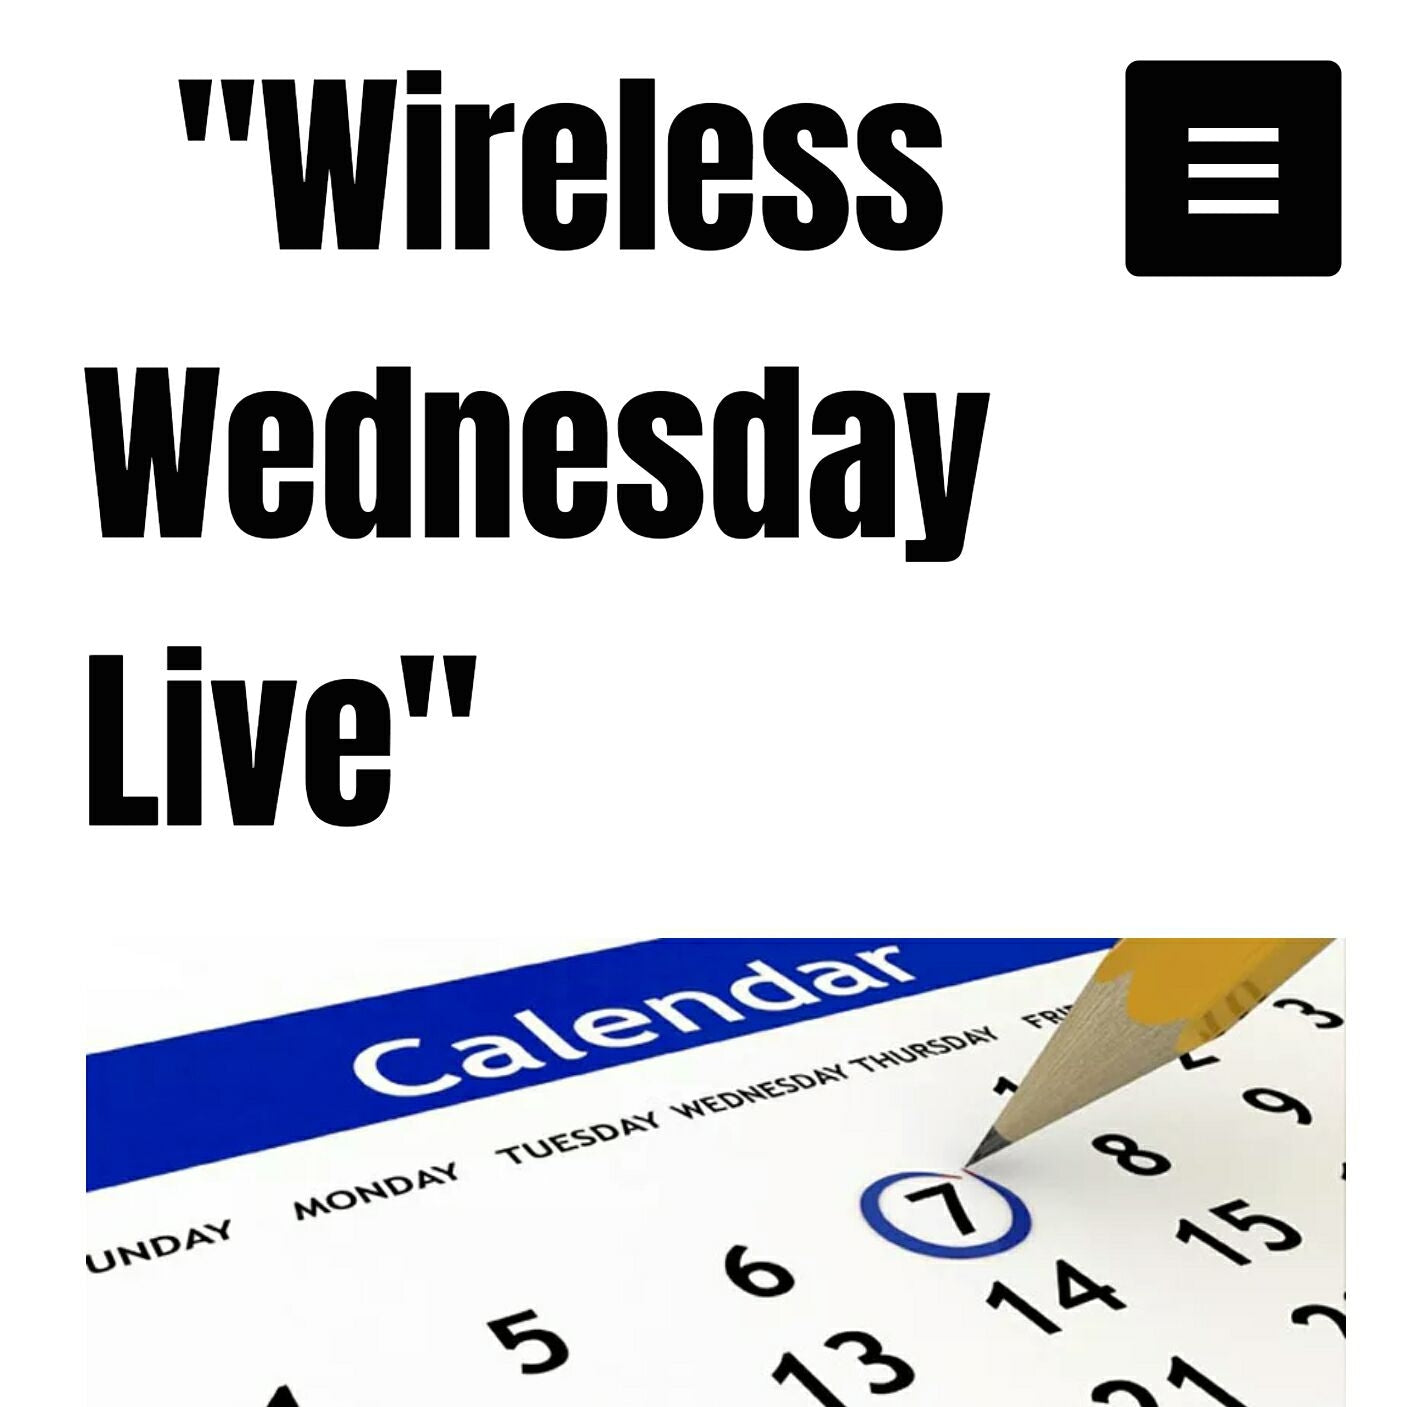 Wireless Wednesday Live - Cut Golf: Performance and Price